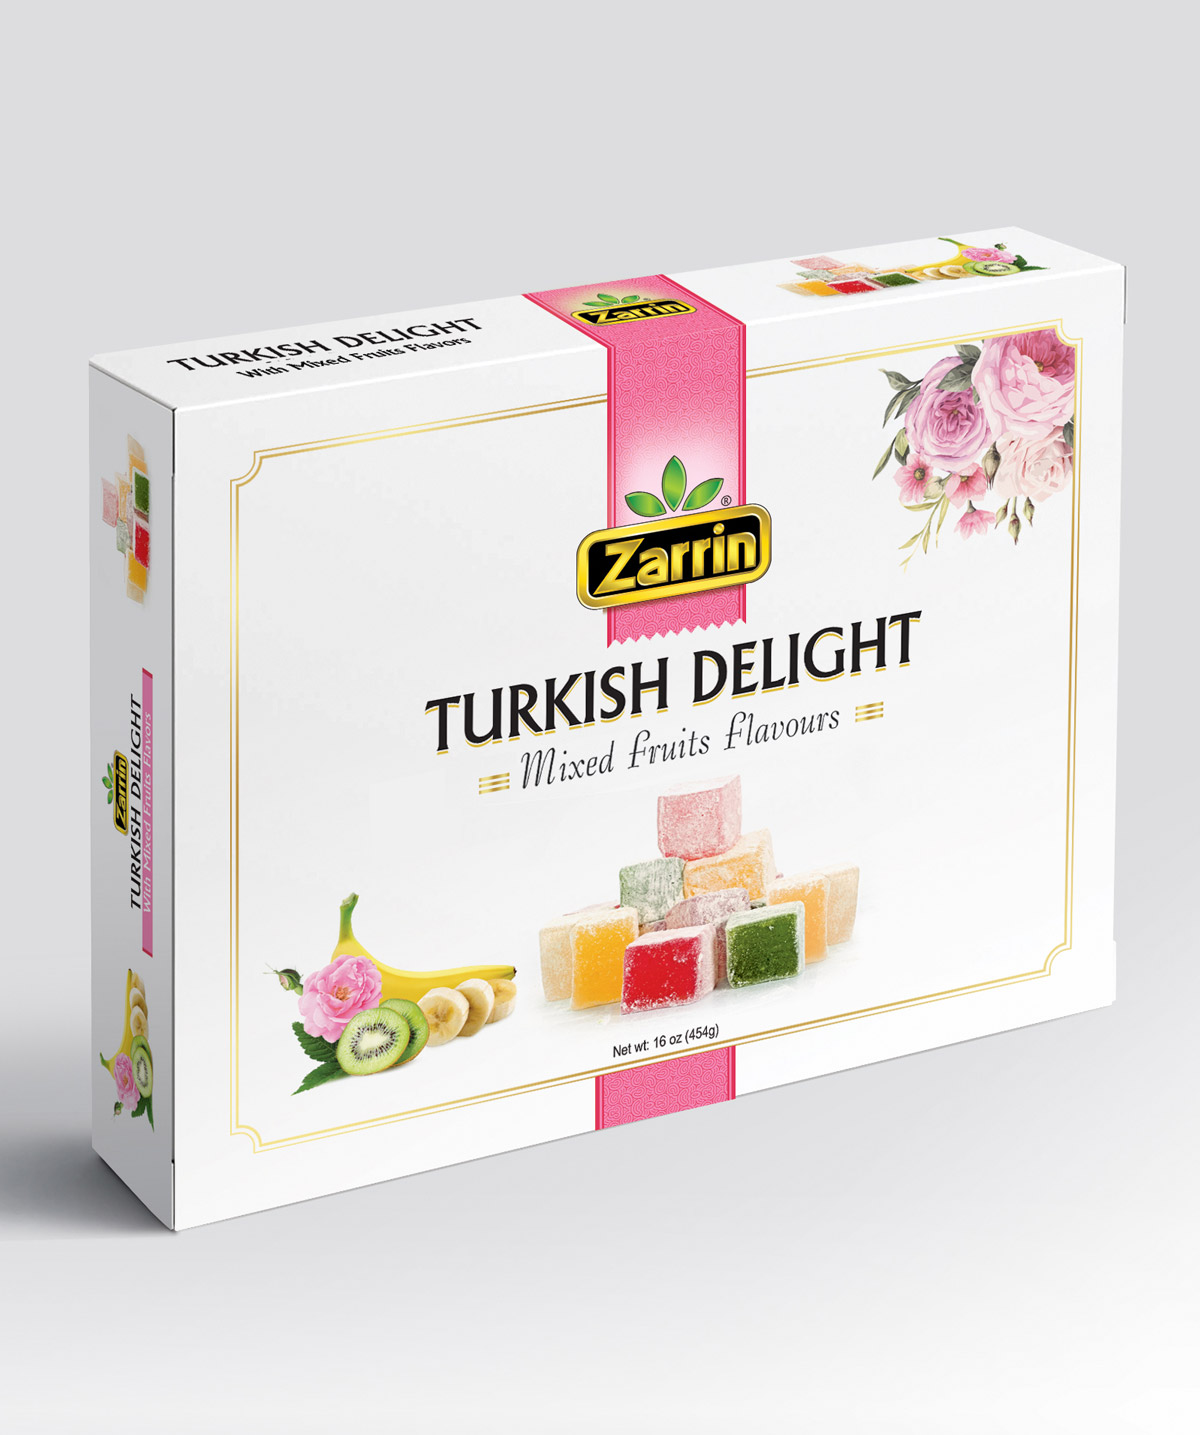 Zarrin Turkish Delight With Mixed Fruits Flavours